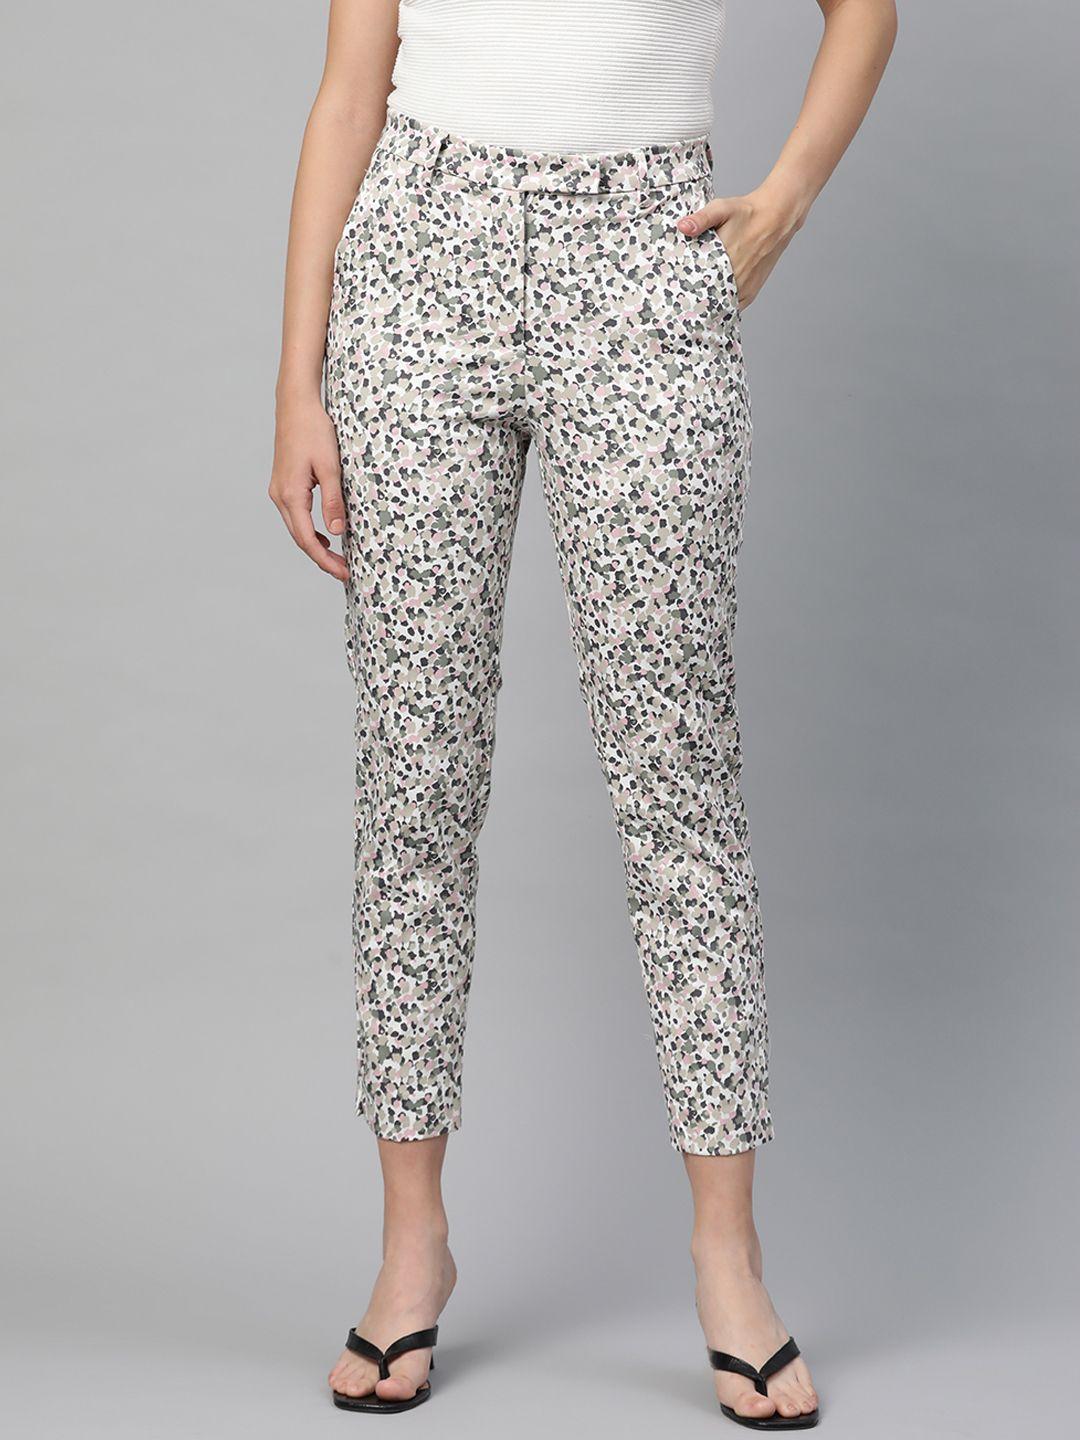 marks-&-spencer-women-white-&-olive-green-printed-slim-fit-cropped-trousers